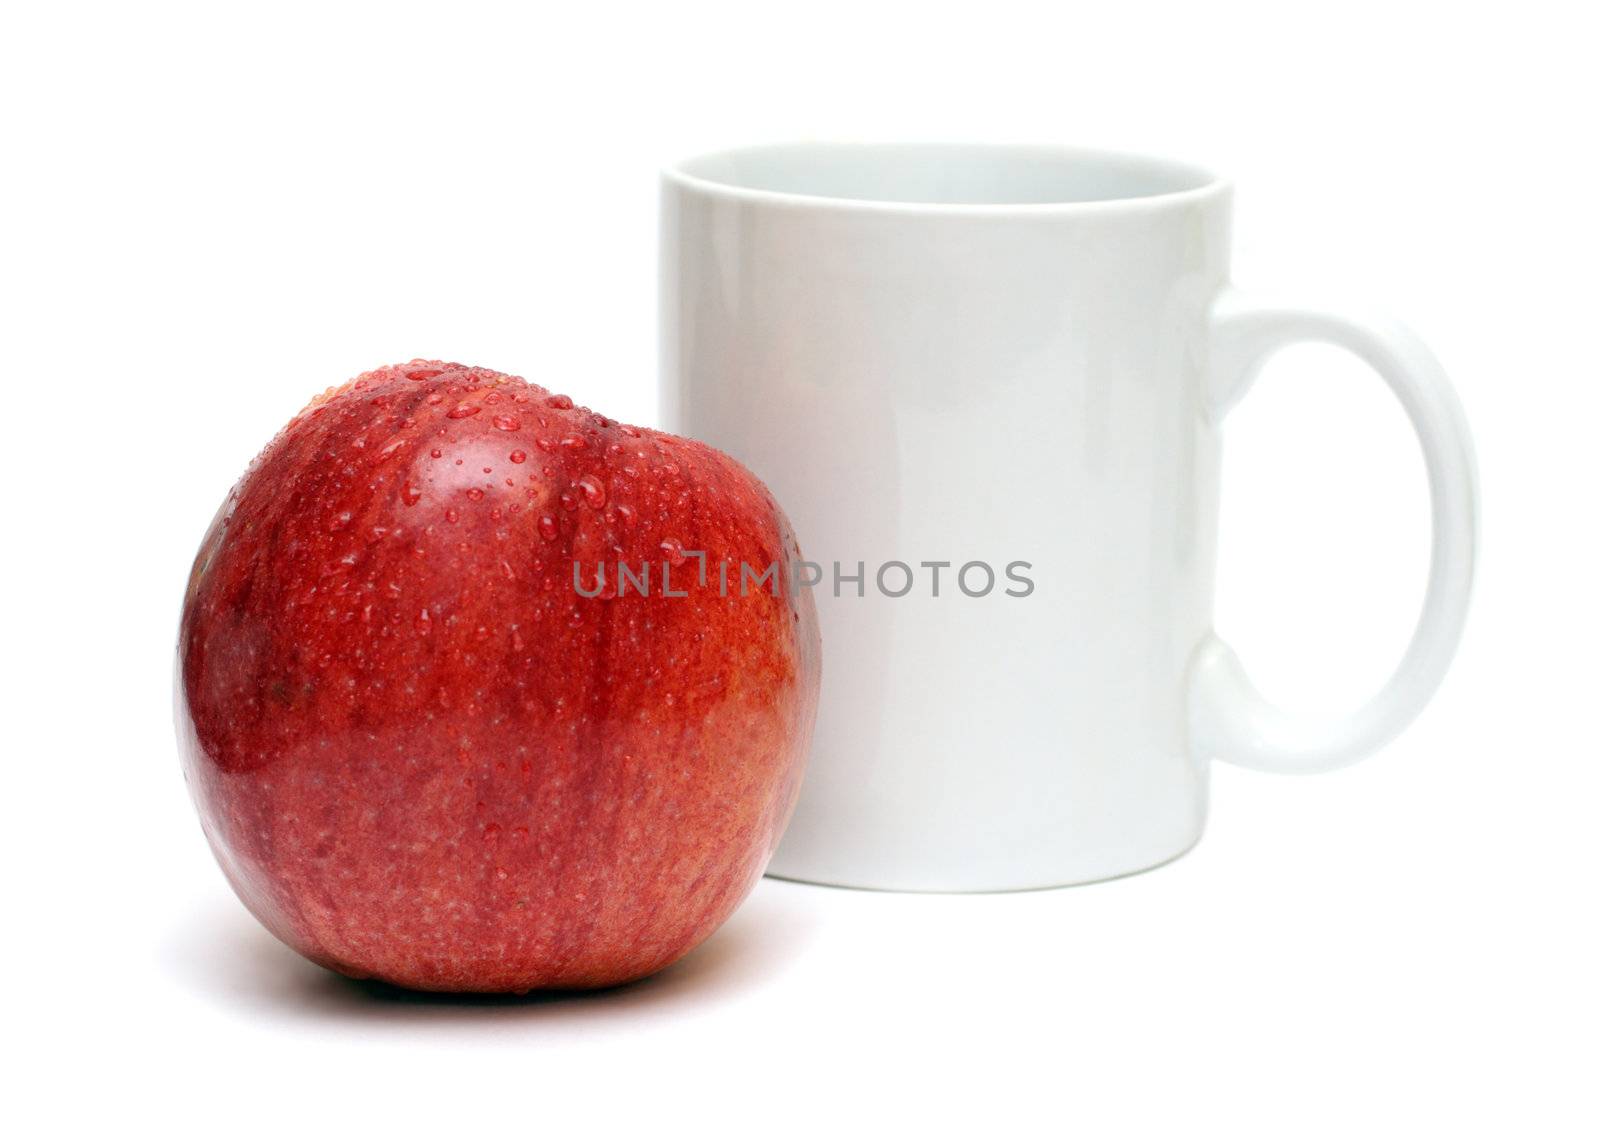 red apple and white mug by Mikko